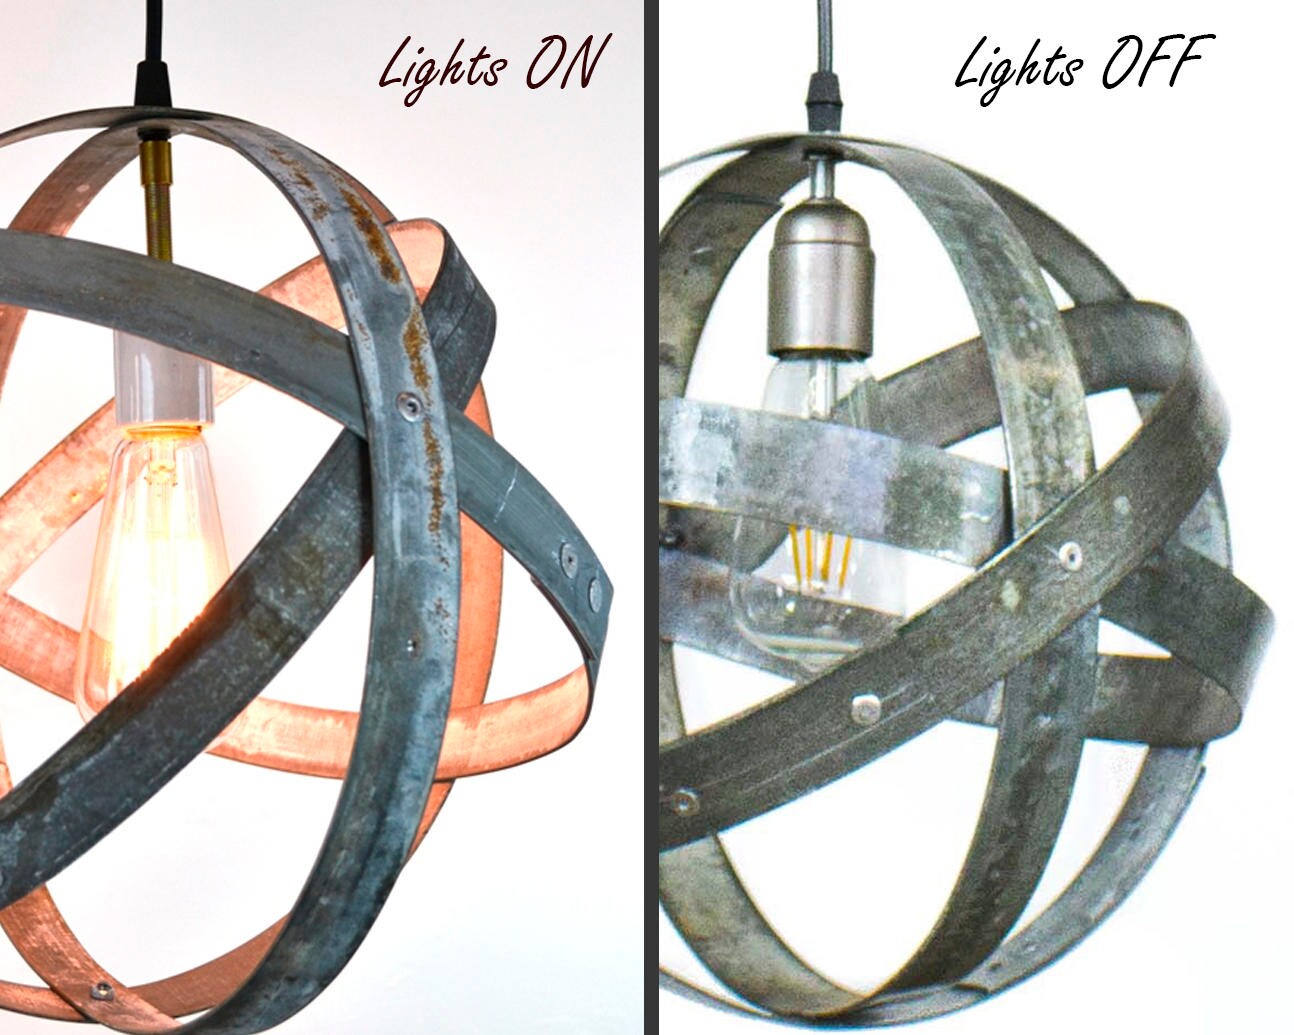 Wine Barrel Chandelier - Plicate - Made from retired California wine barrel rings. 100% Recycled!